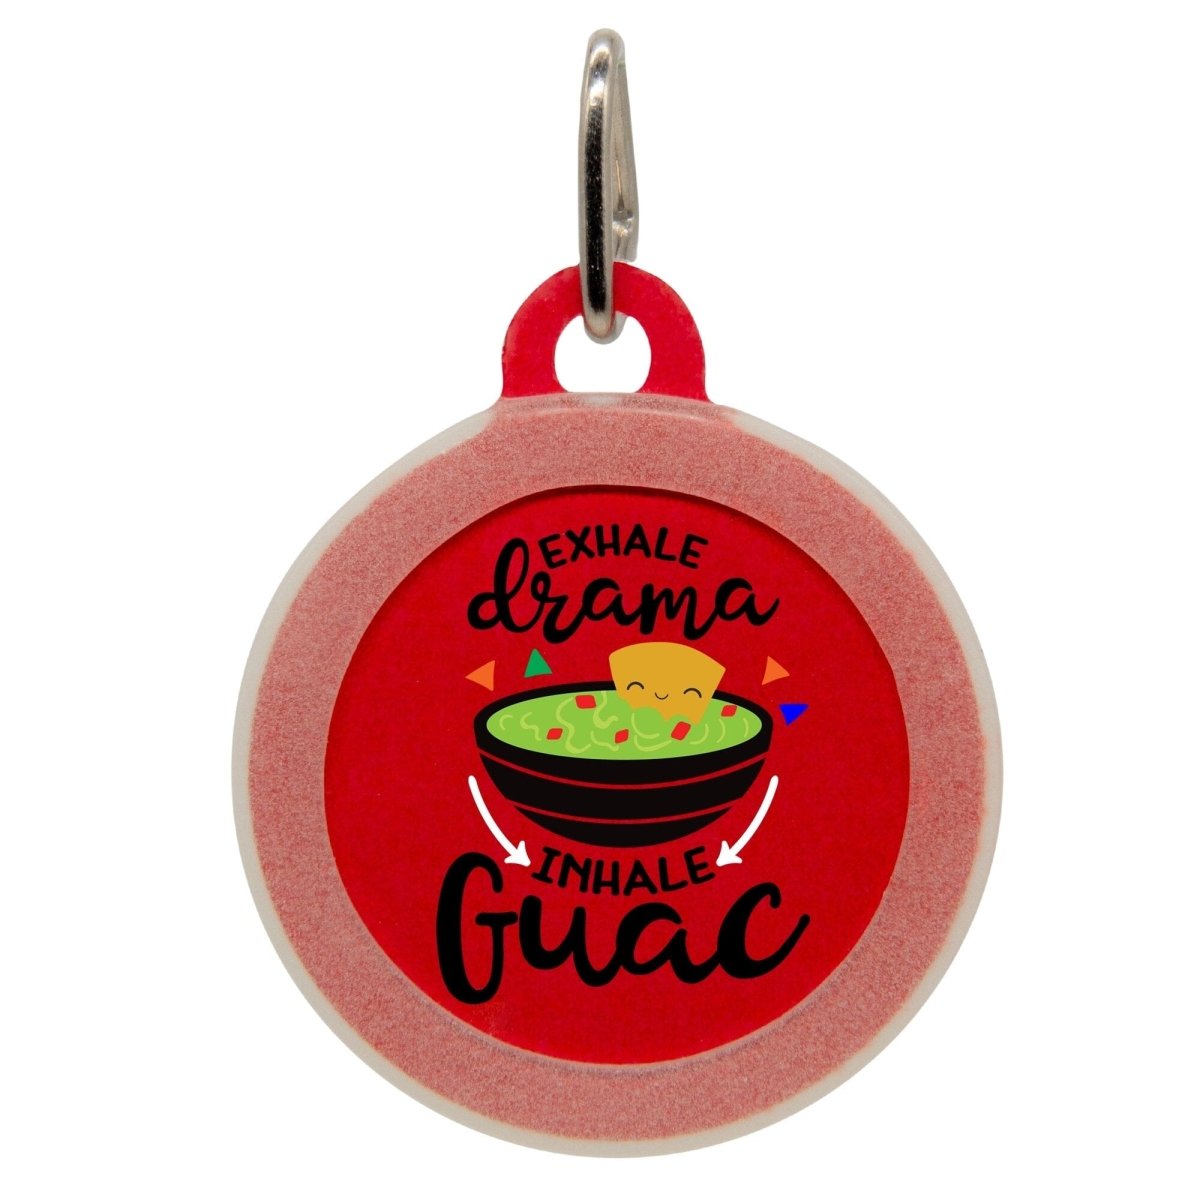 Exhale Drama Inhale Guac Name Tag - Oh My Paw'd